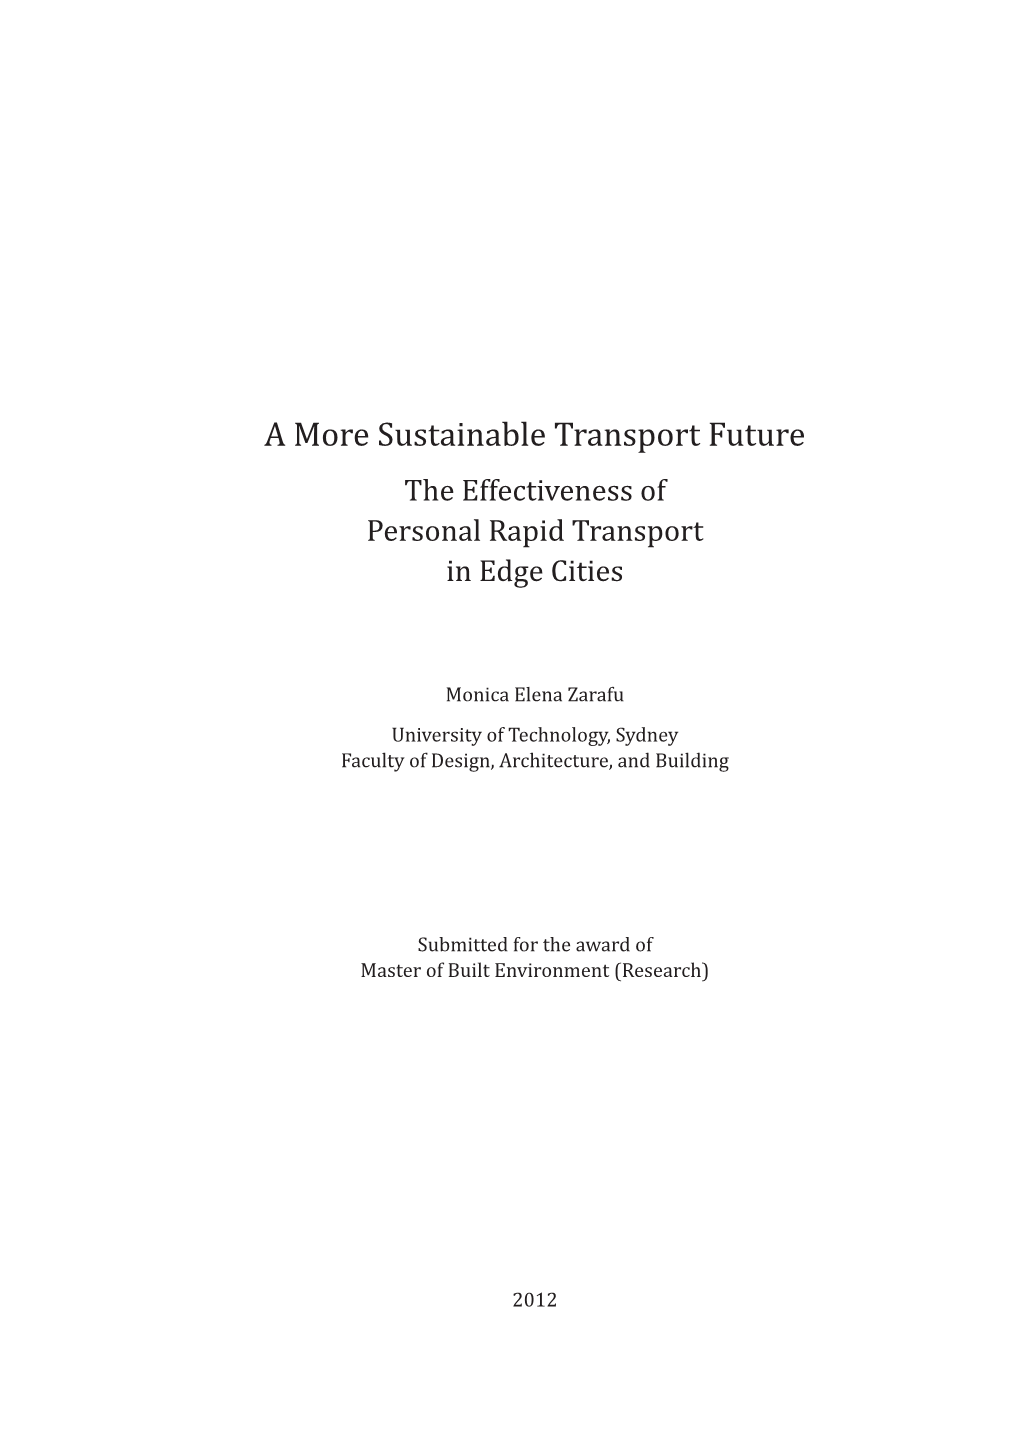 A More Sustainable Transport Future the Effectiveness of Personal Rapid Transport in Edge Cities